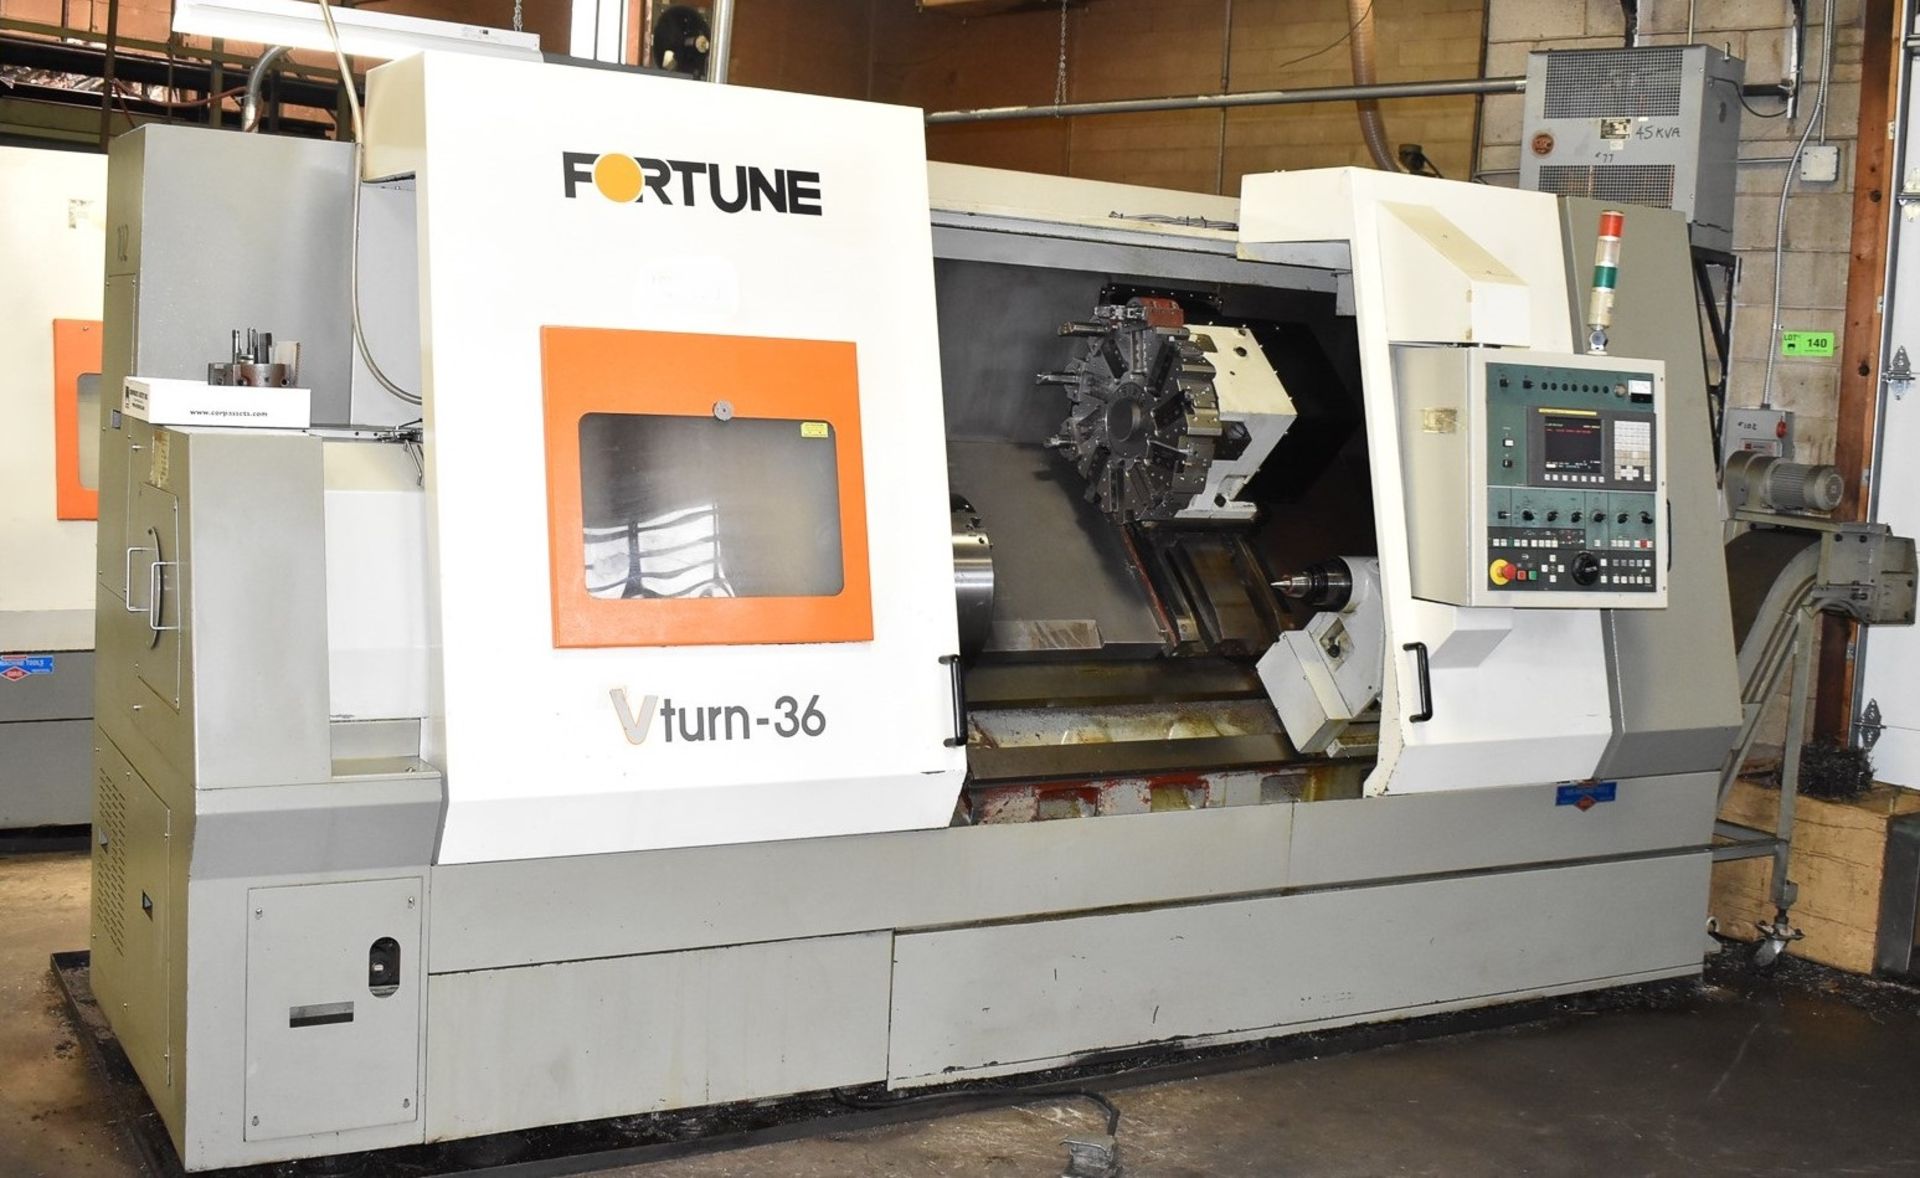 21.65"x35" Victor (Fortune) Mdl VTURN-36 2-Axis CNC Turning Center Lathe, S/N MD-1636, New 2007 - Image 2 of 10